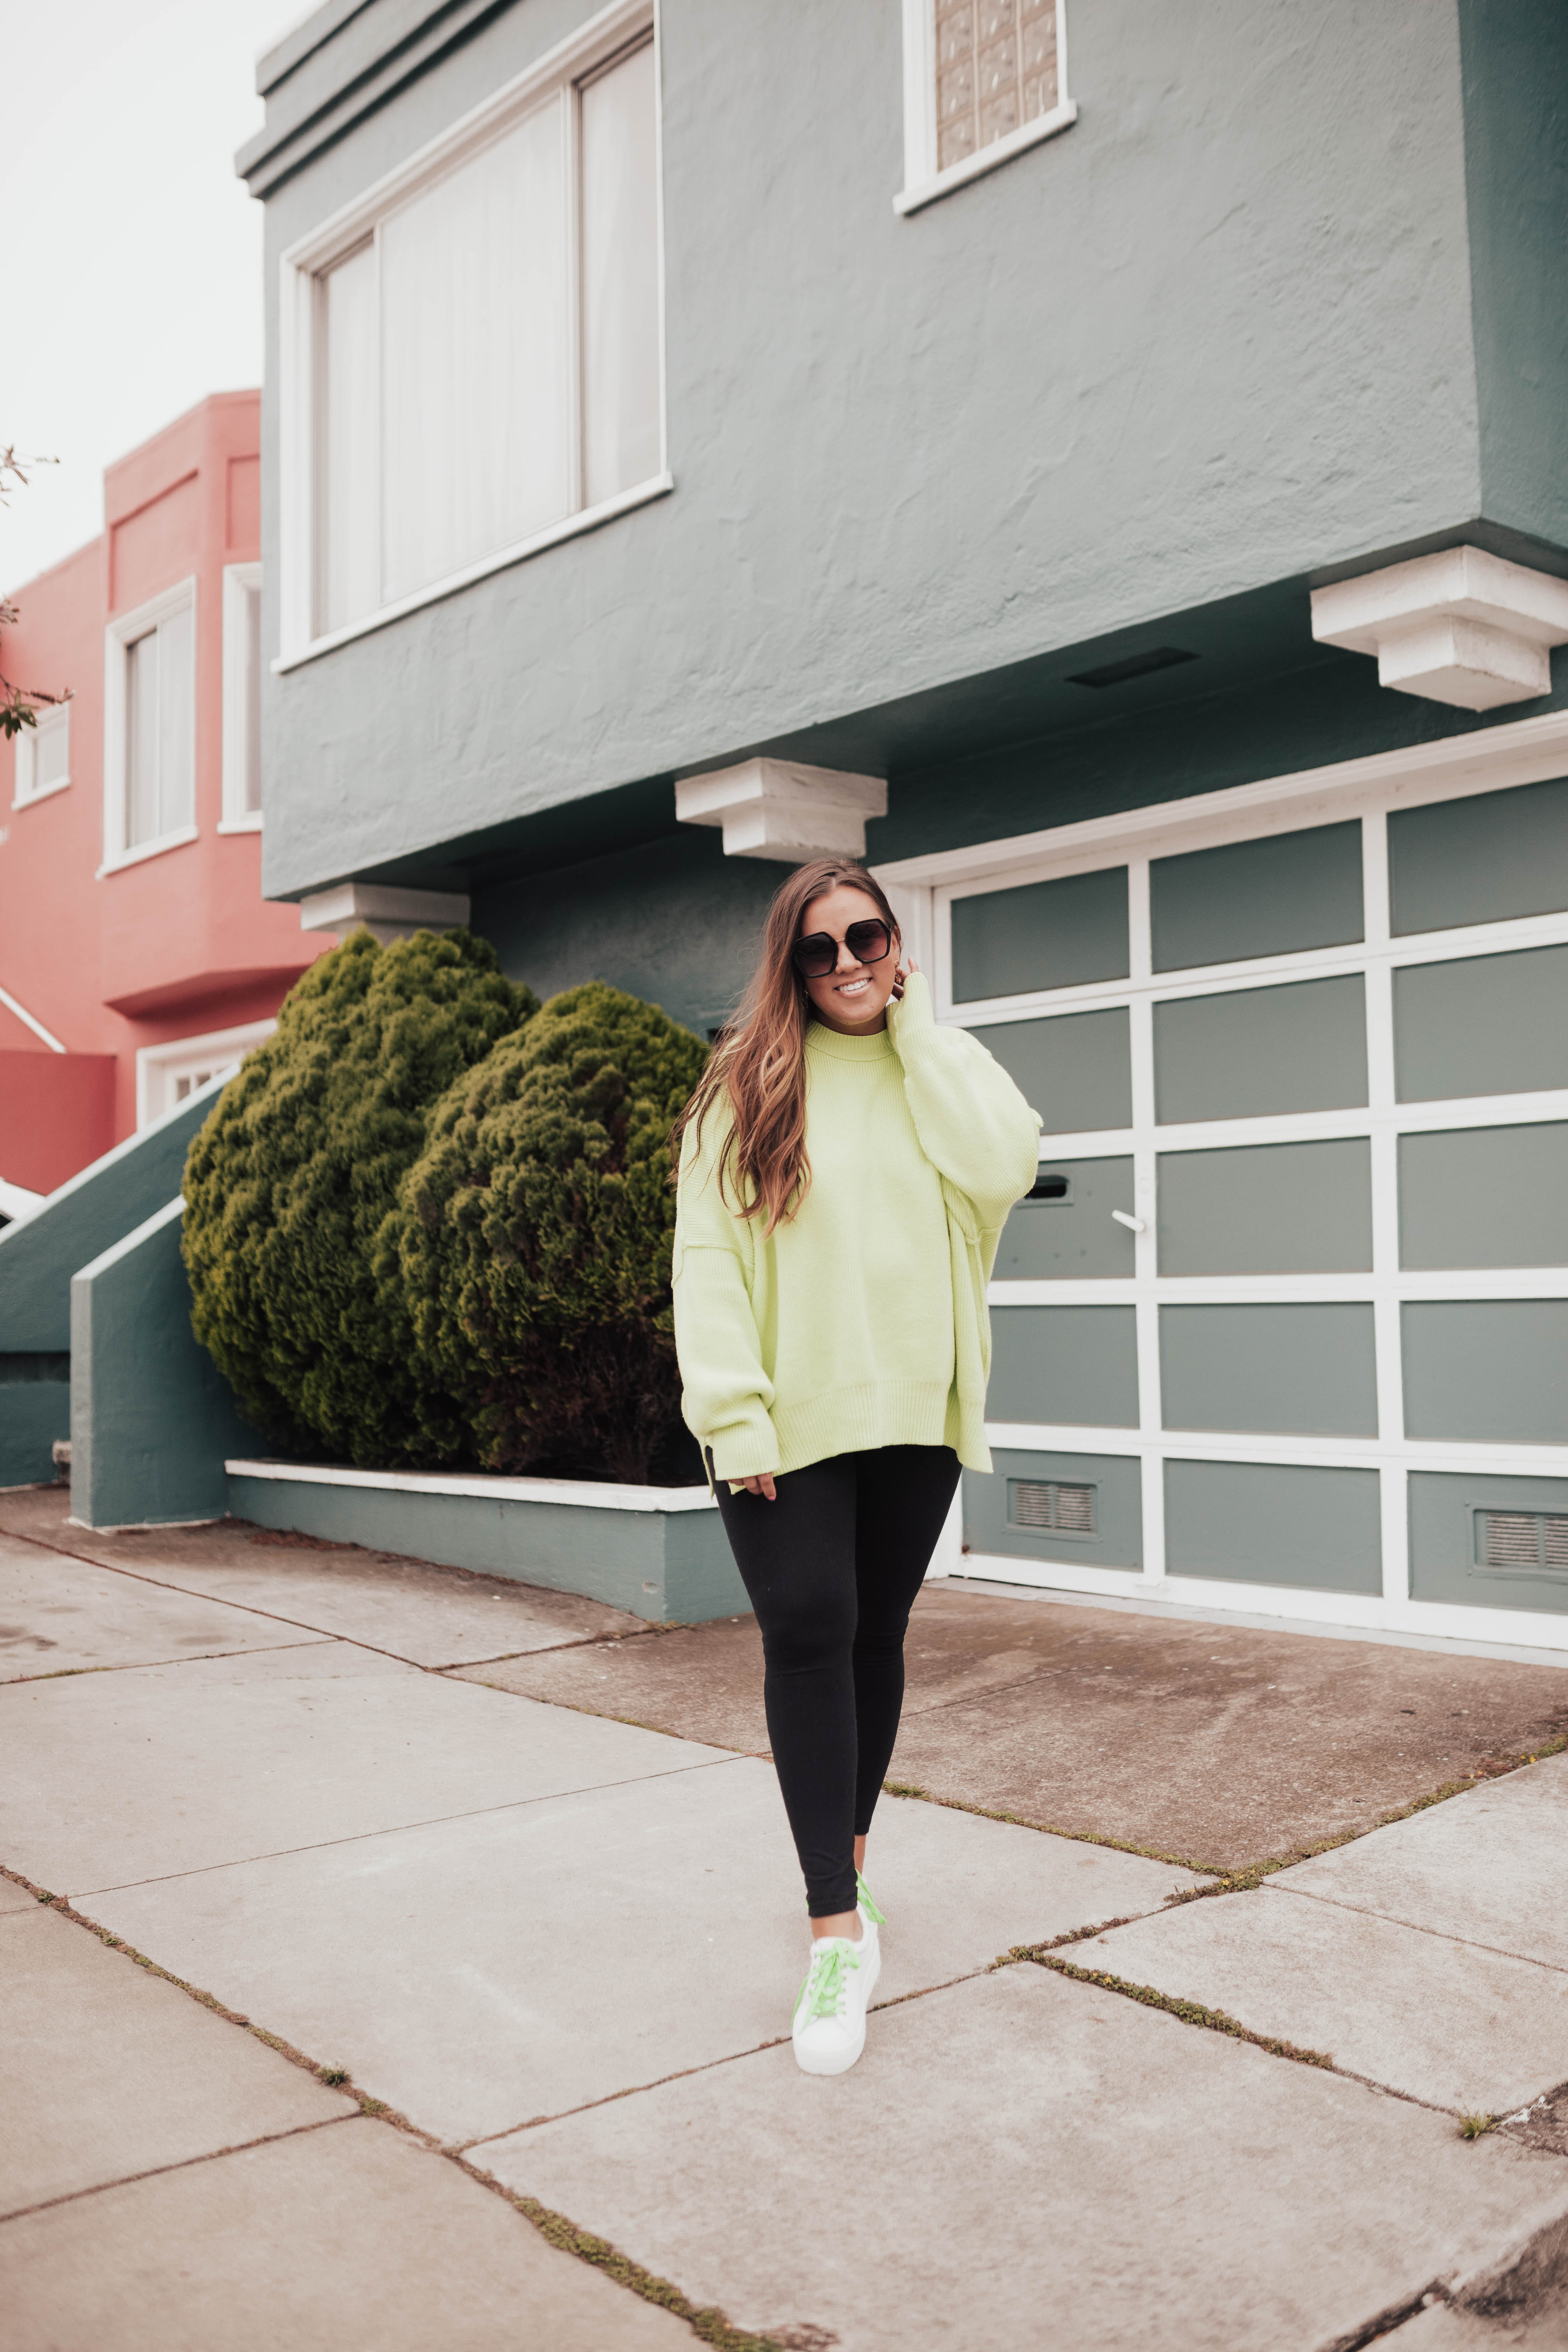 San Francisco blogger Ashley Zeal from Two Peas in a Prada shares her new sneakers from JSlides. She is wearing head to toe Zappos!